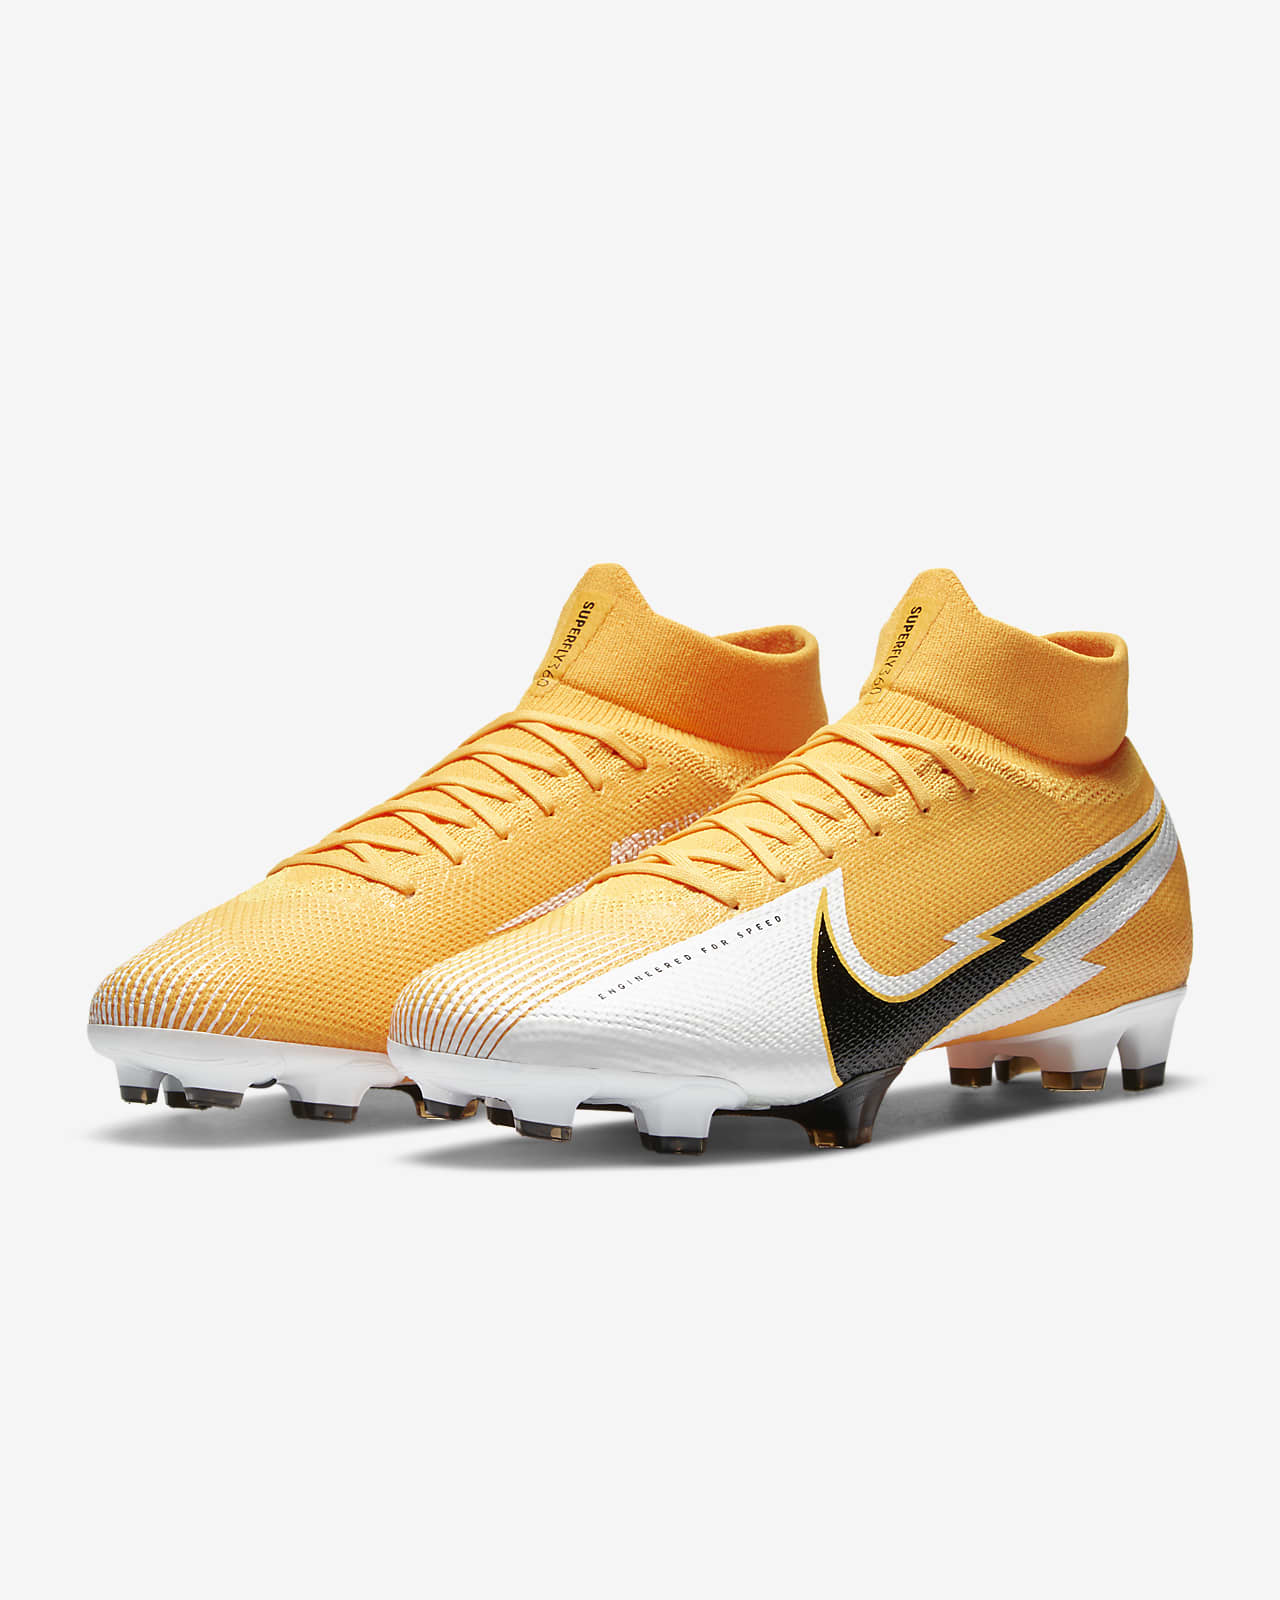 Nike Mercurial Superfly 7 Pro FG Firm 